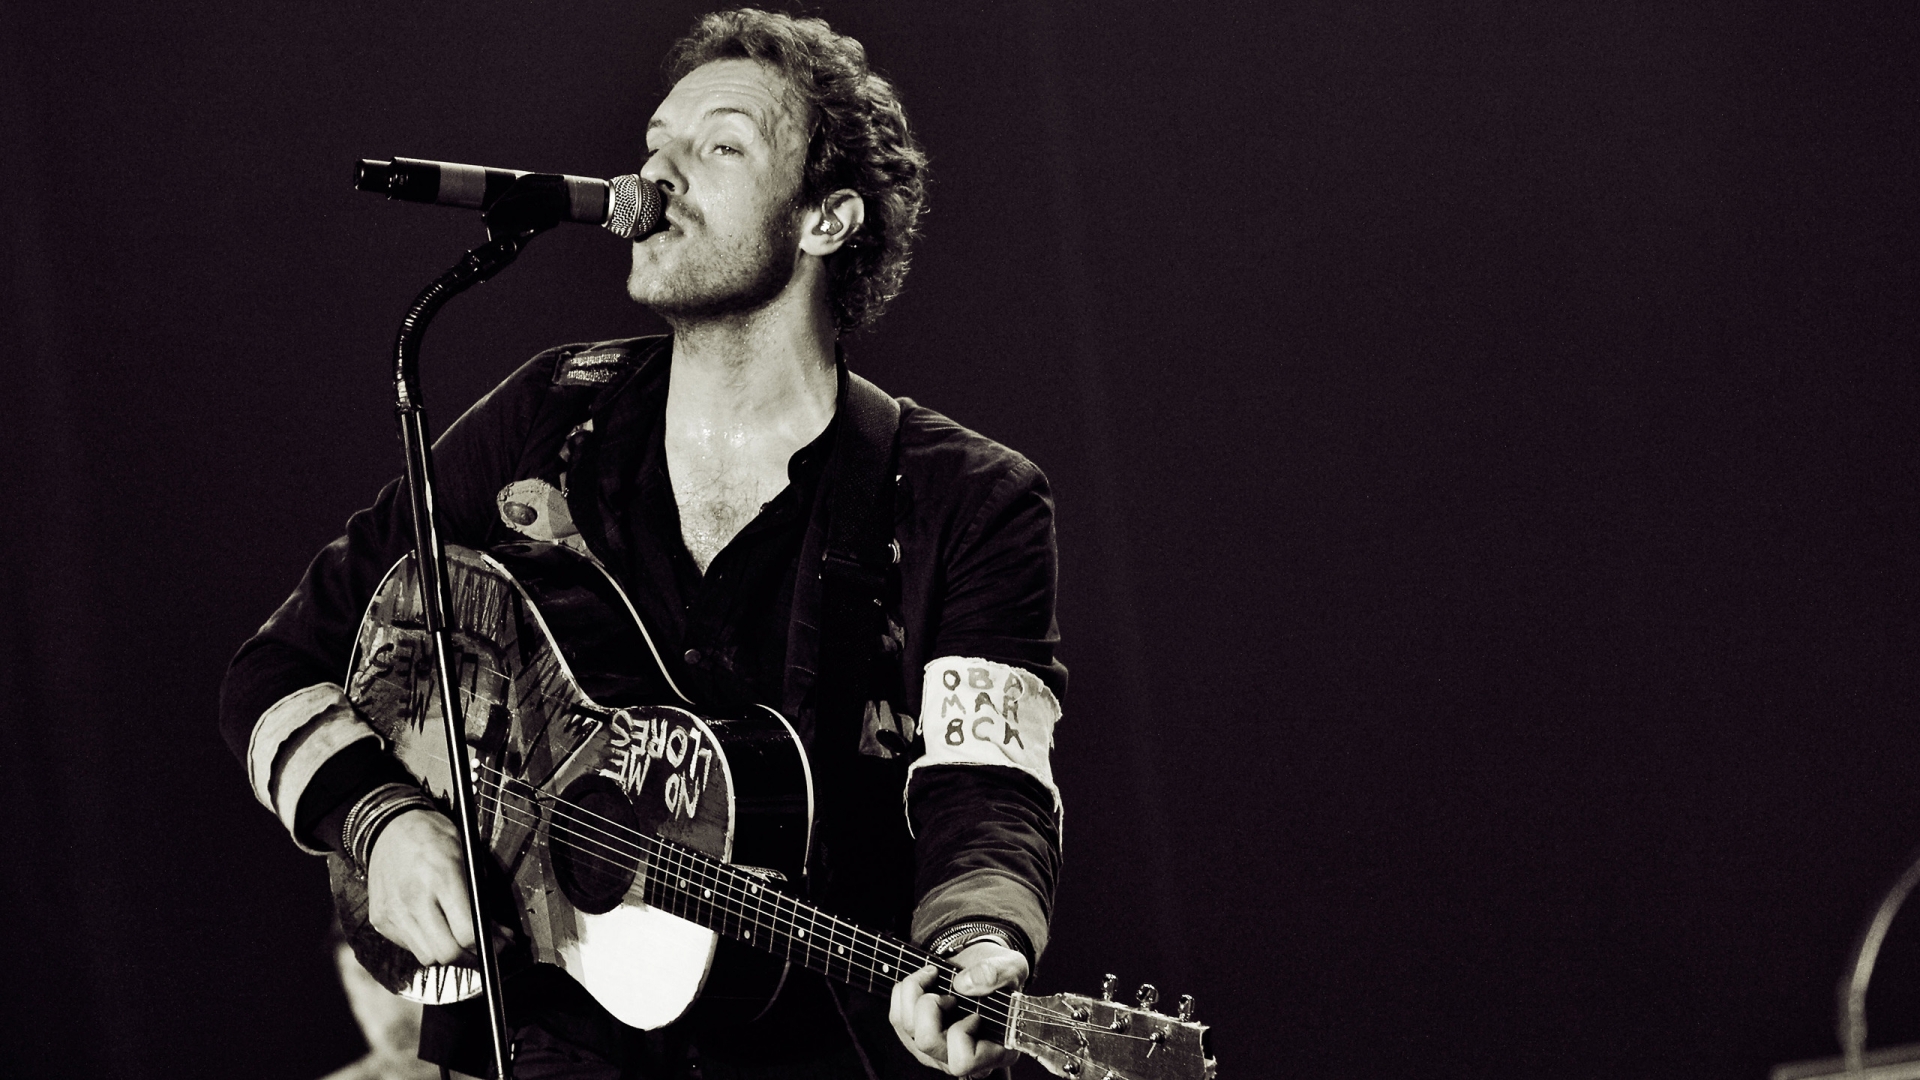 Chris Martin Coldplay for 1920 x 1080 HDTV 1080p resolution